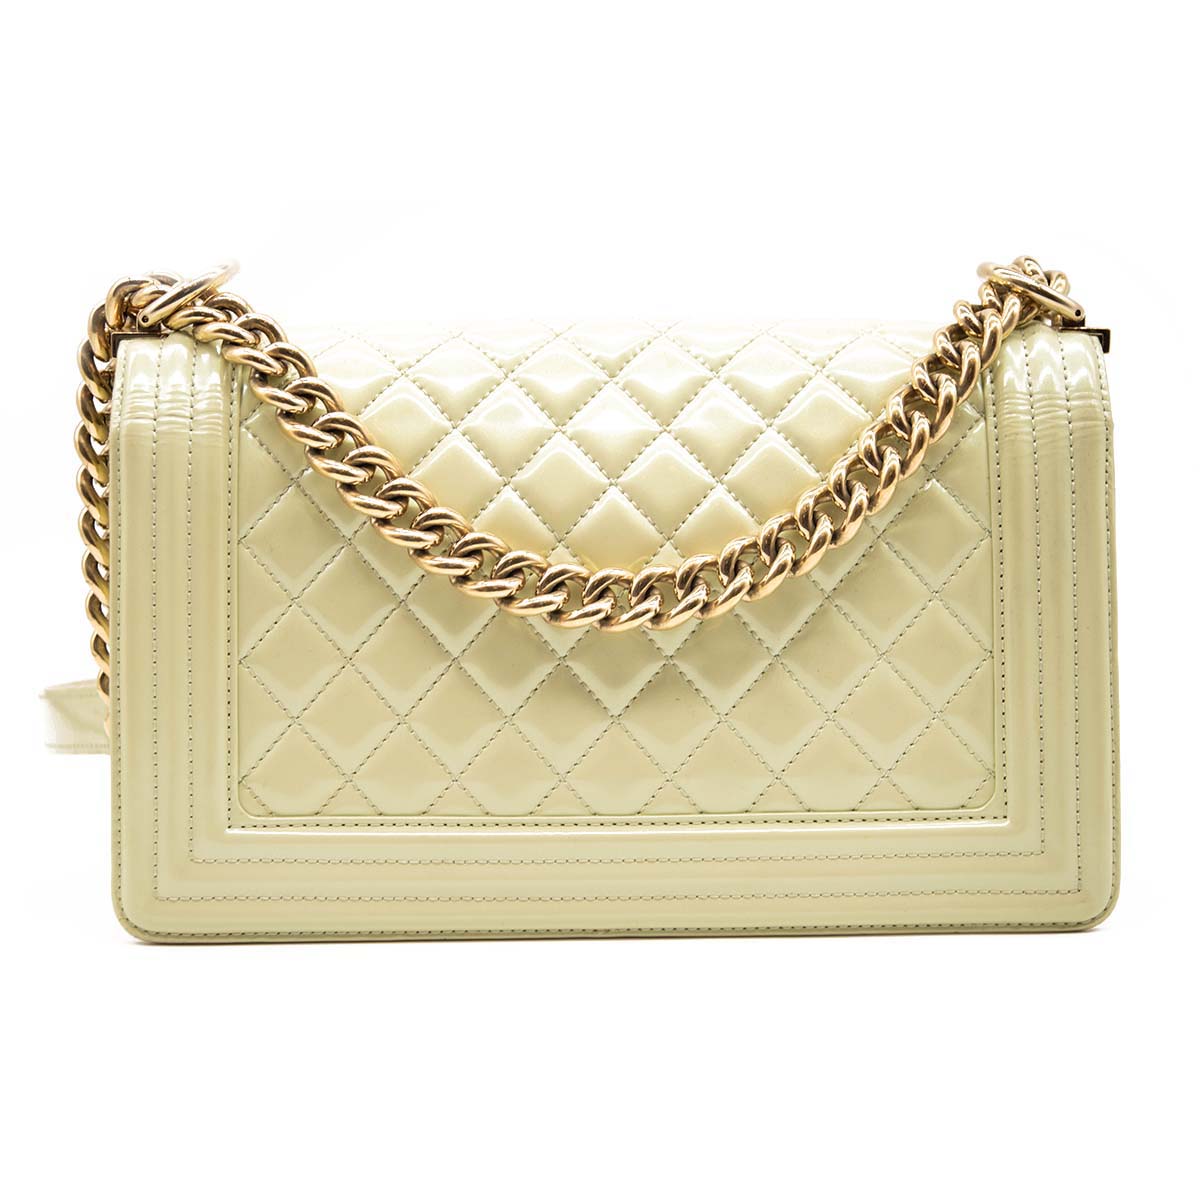 CHANEL Chanel Mint Green Quilted Patent Leather Medium Boy Flap Bag -  MyDesignerly